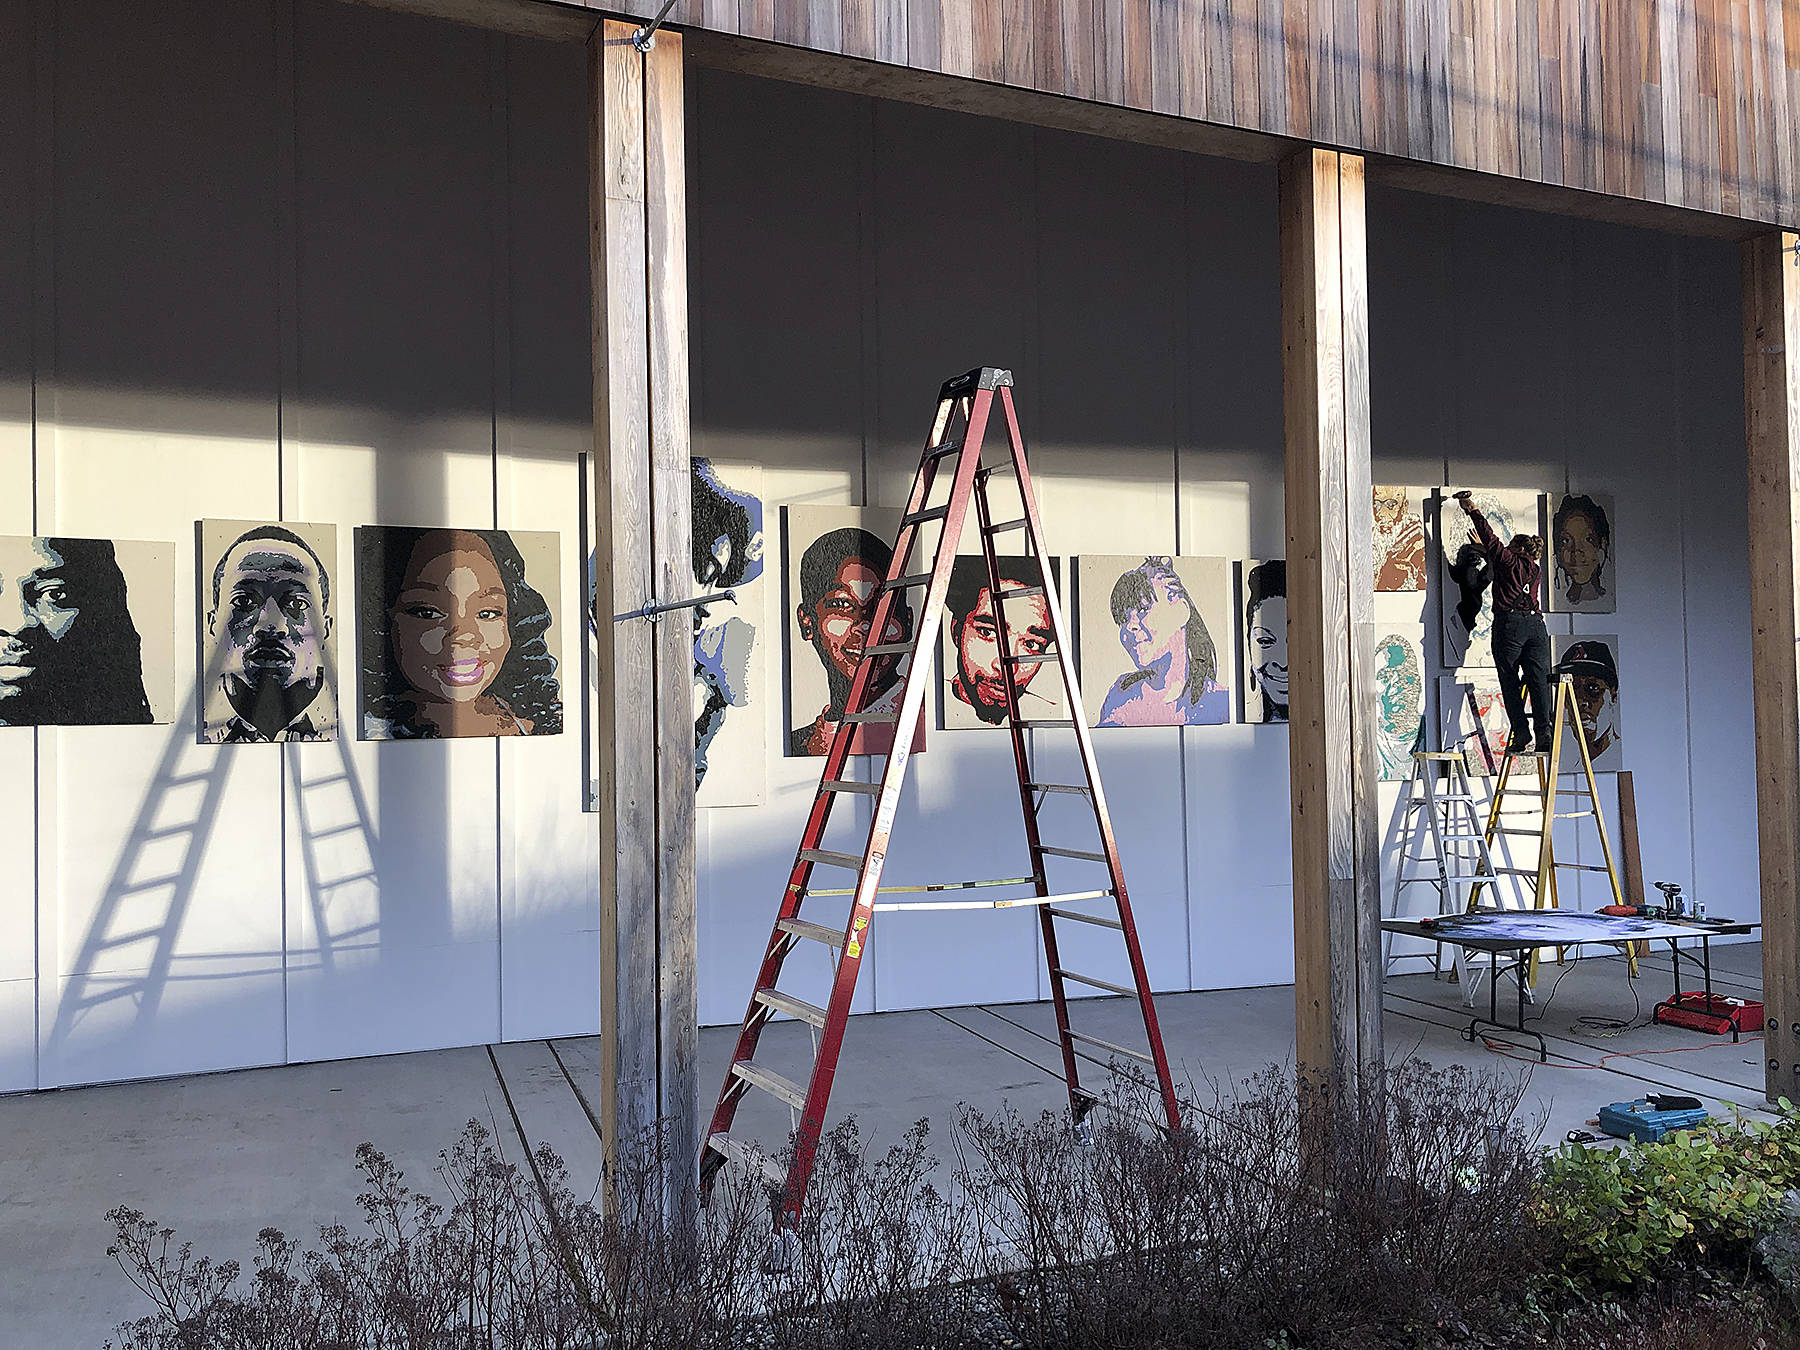 Local artist and exhibit designer Jessica DeWire helps puts the finishing touches on The Vashon Remembrance Project’s new installation at Vashon Center for the Arts (Tom Hughes Photo).